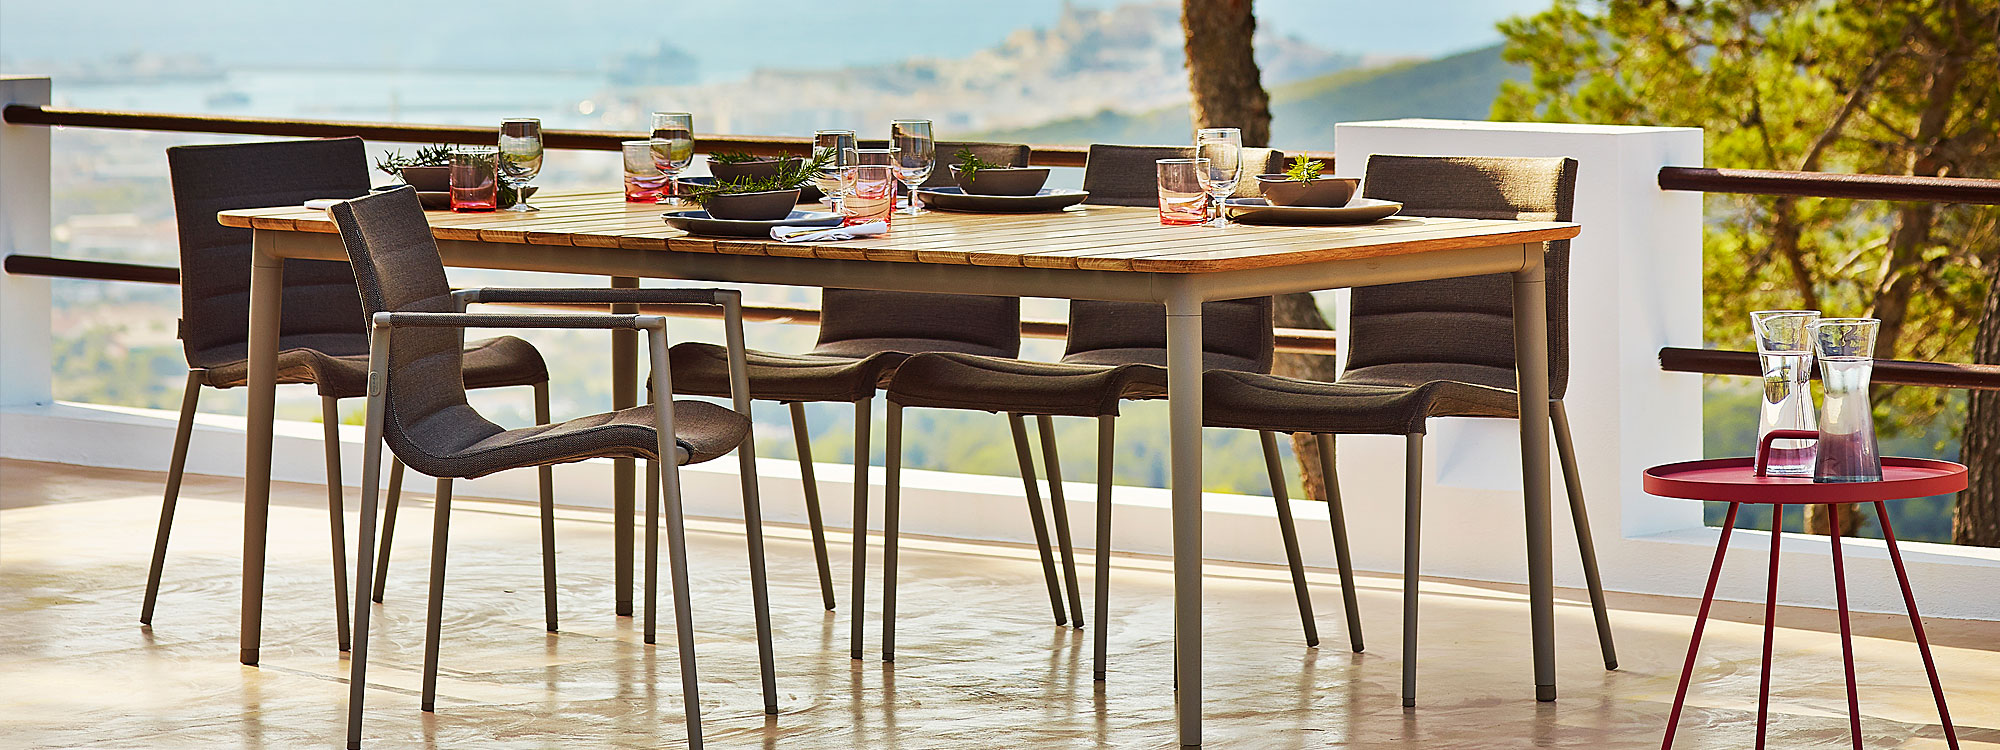 Image of taupe aluminum and teak Core dining table set for dinner, surrounded by Core upholstered dining chairs by Cane-line